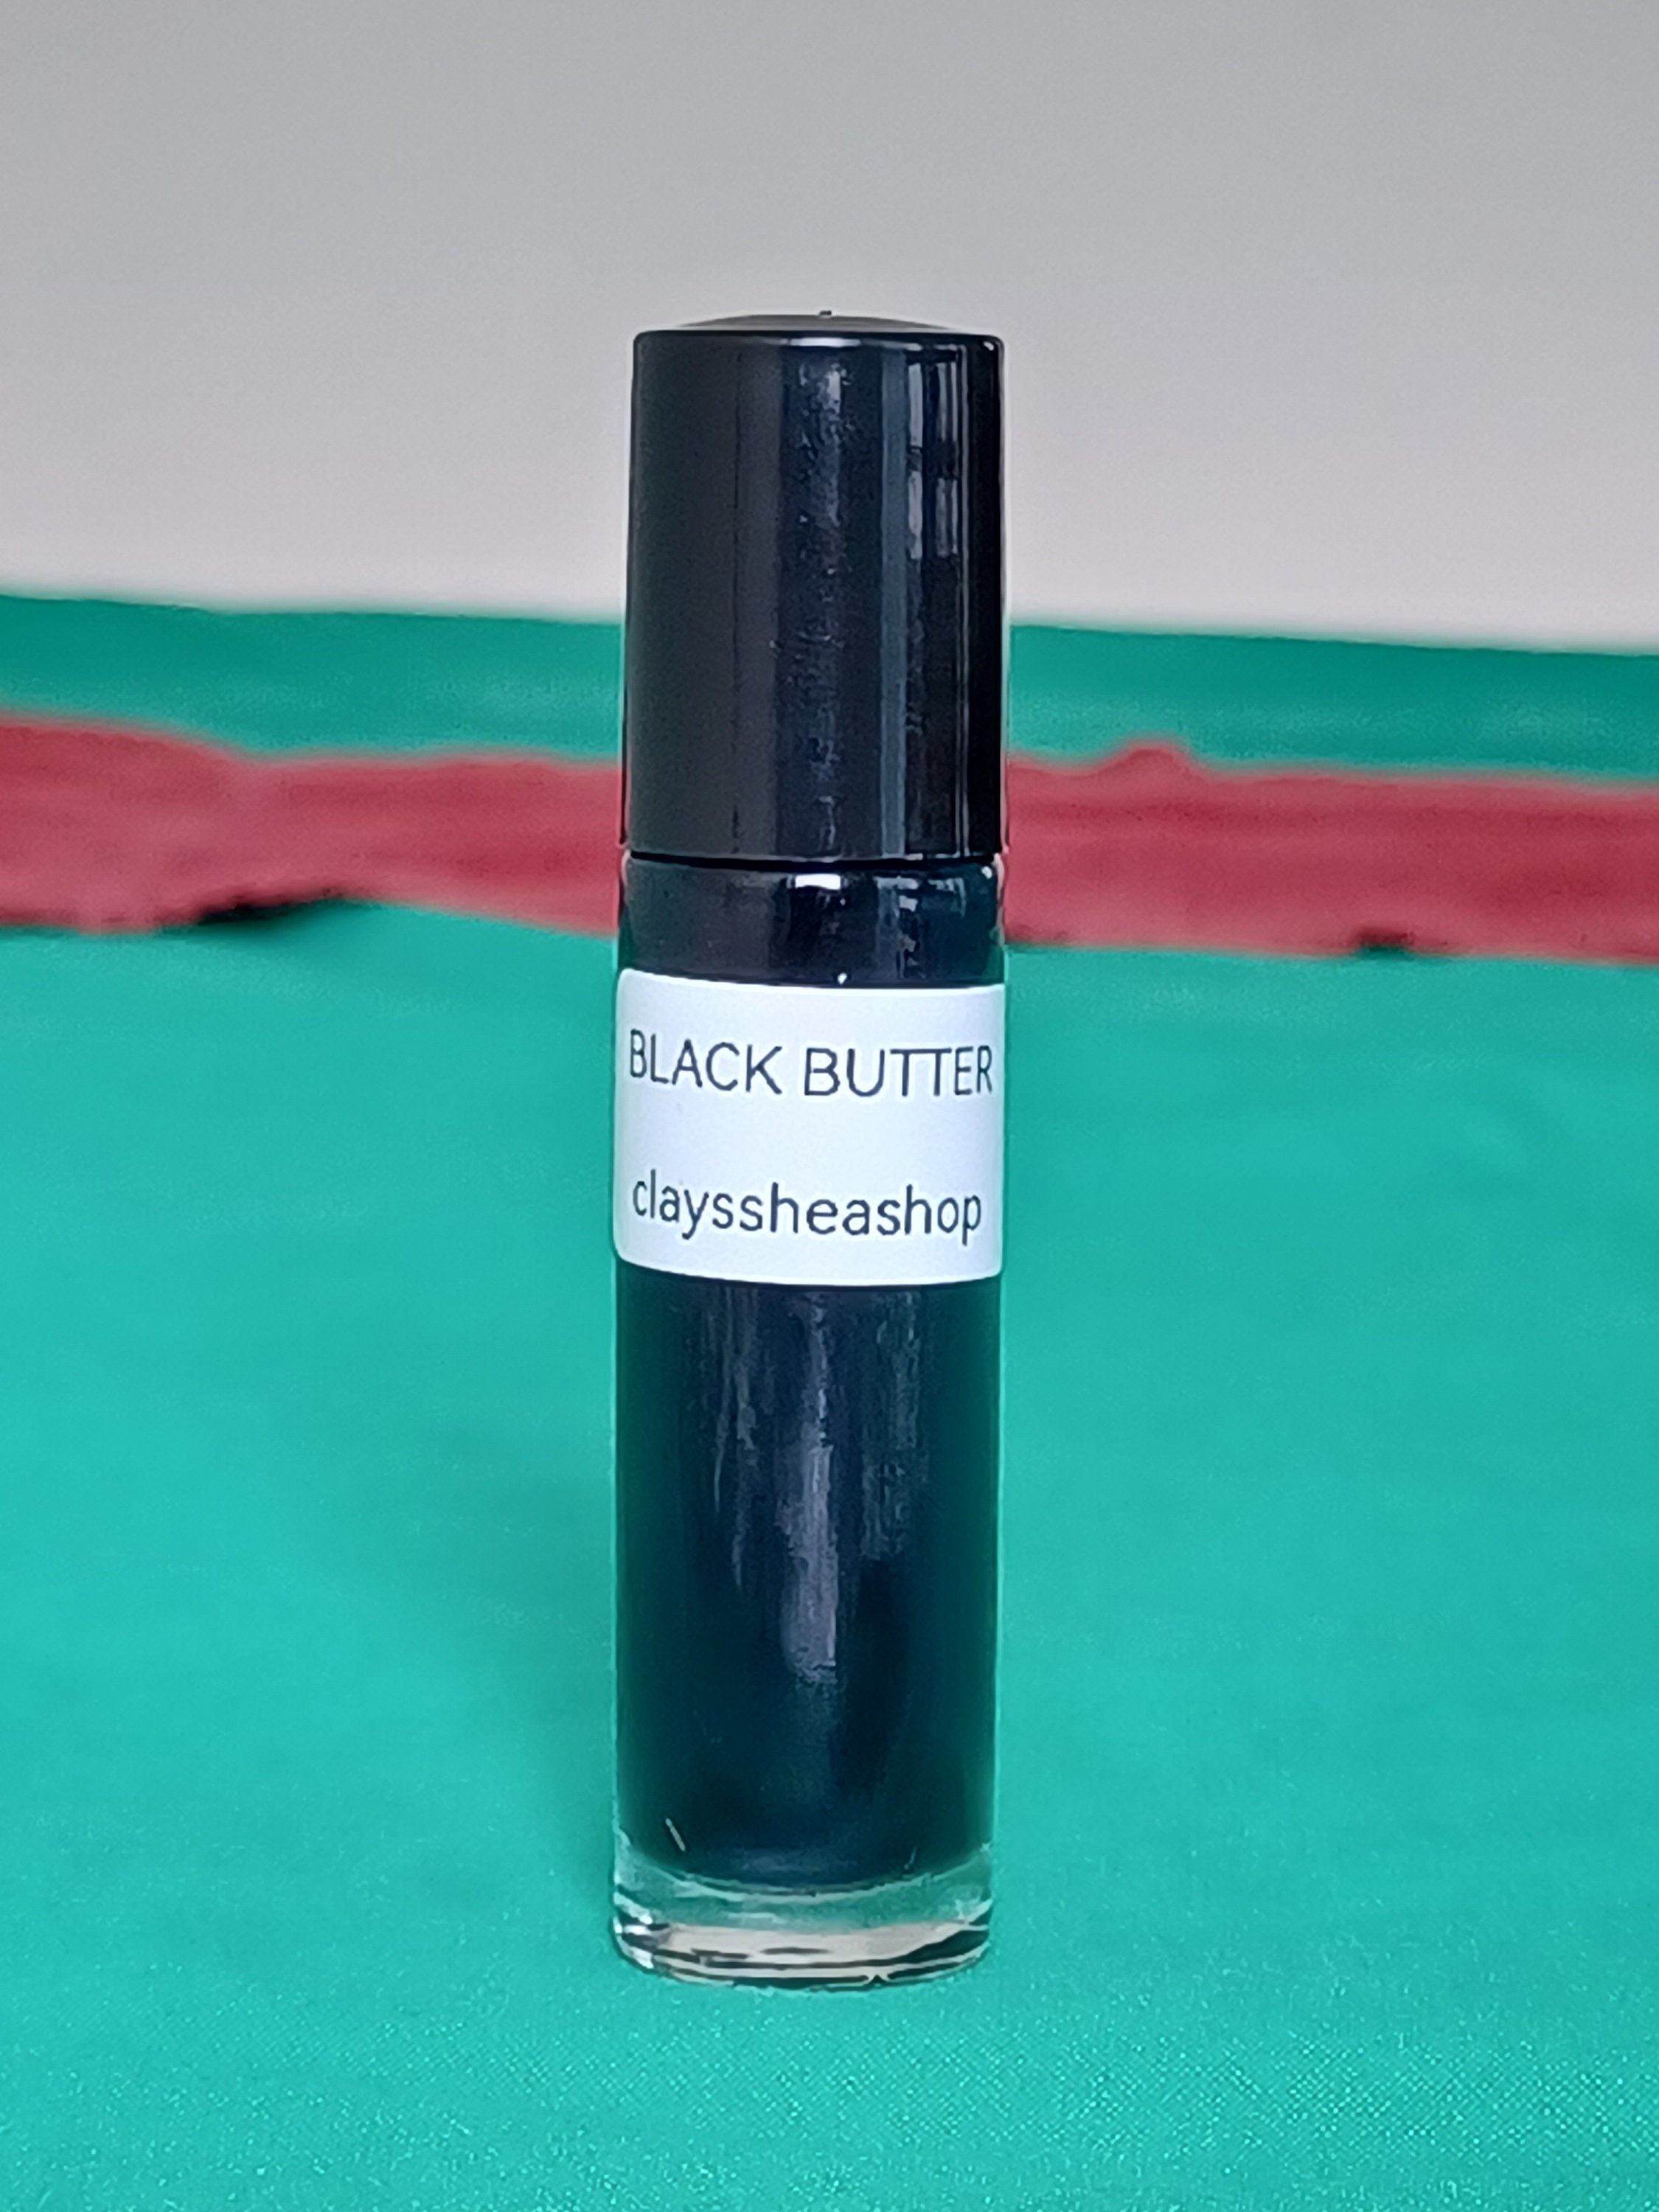  ONISAVINGS Perfume Black Butter Body Oil Scented Fragrance :  Beauty & Personal Care